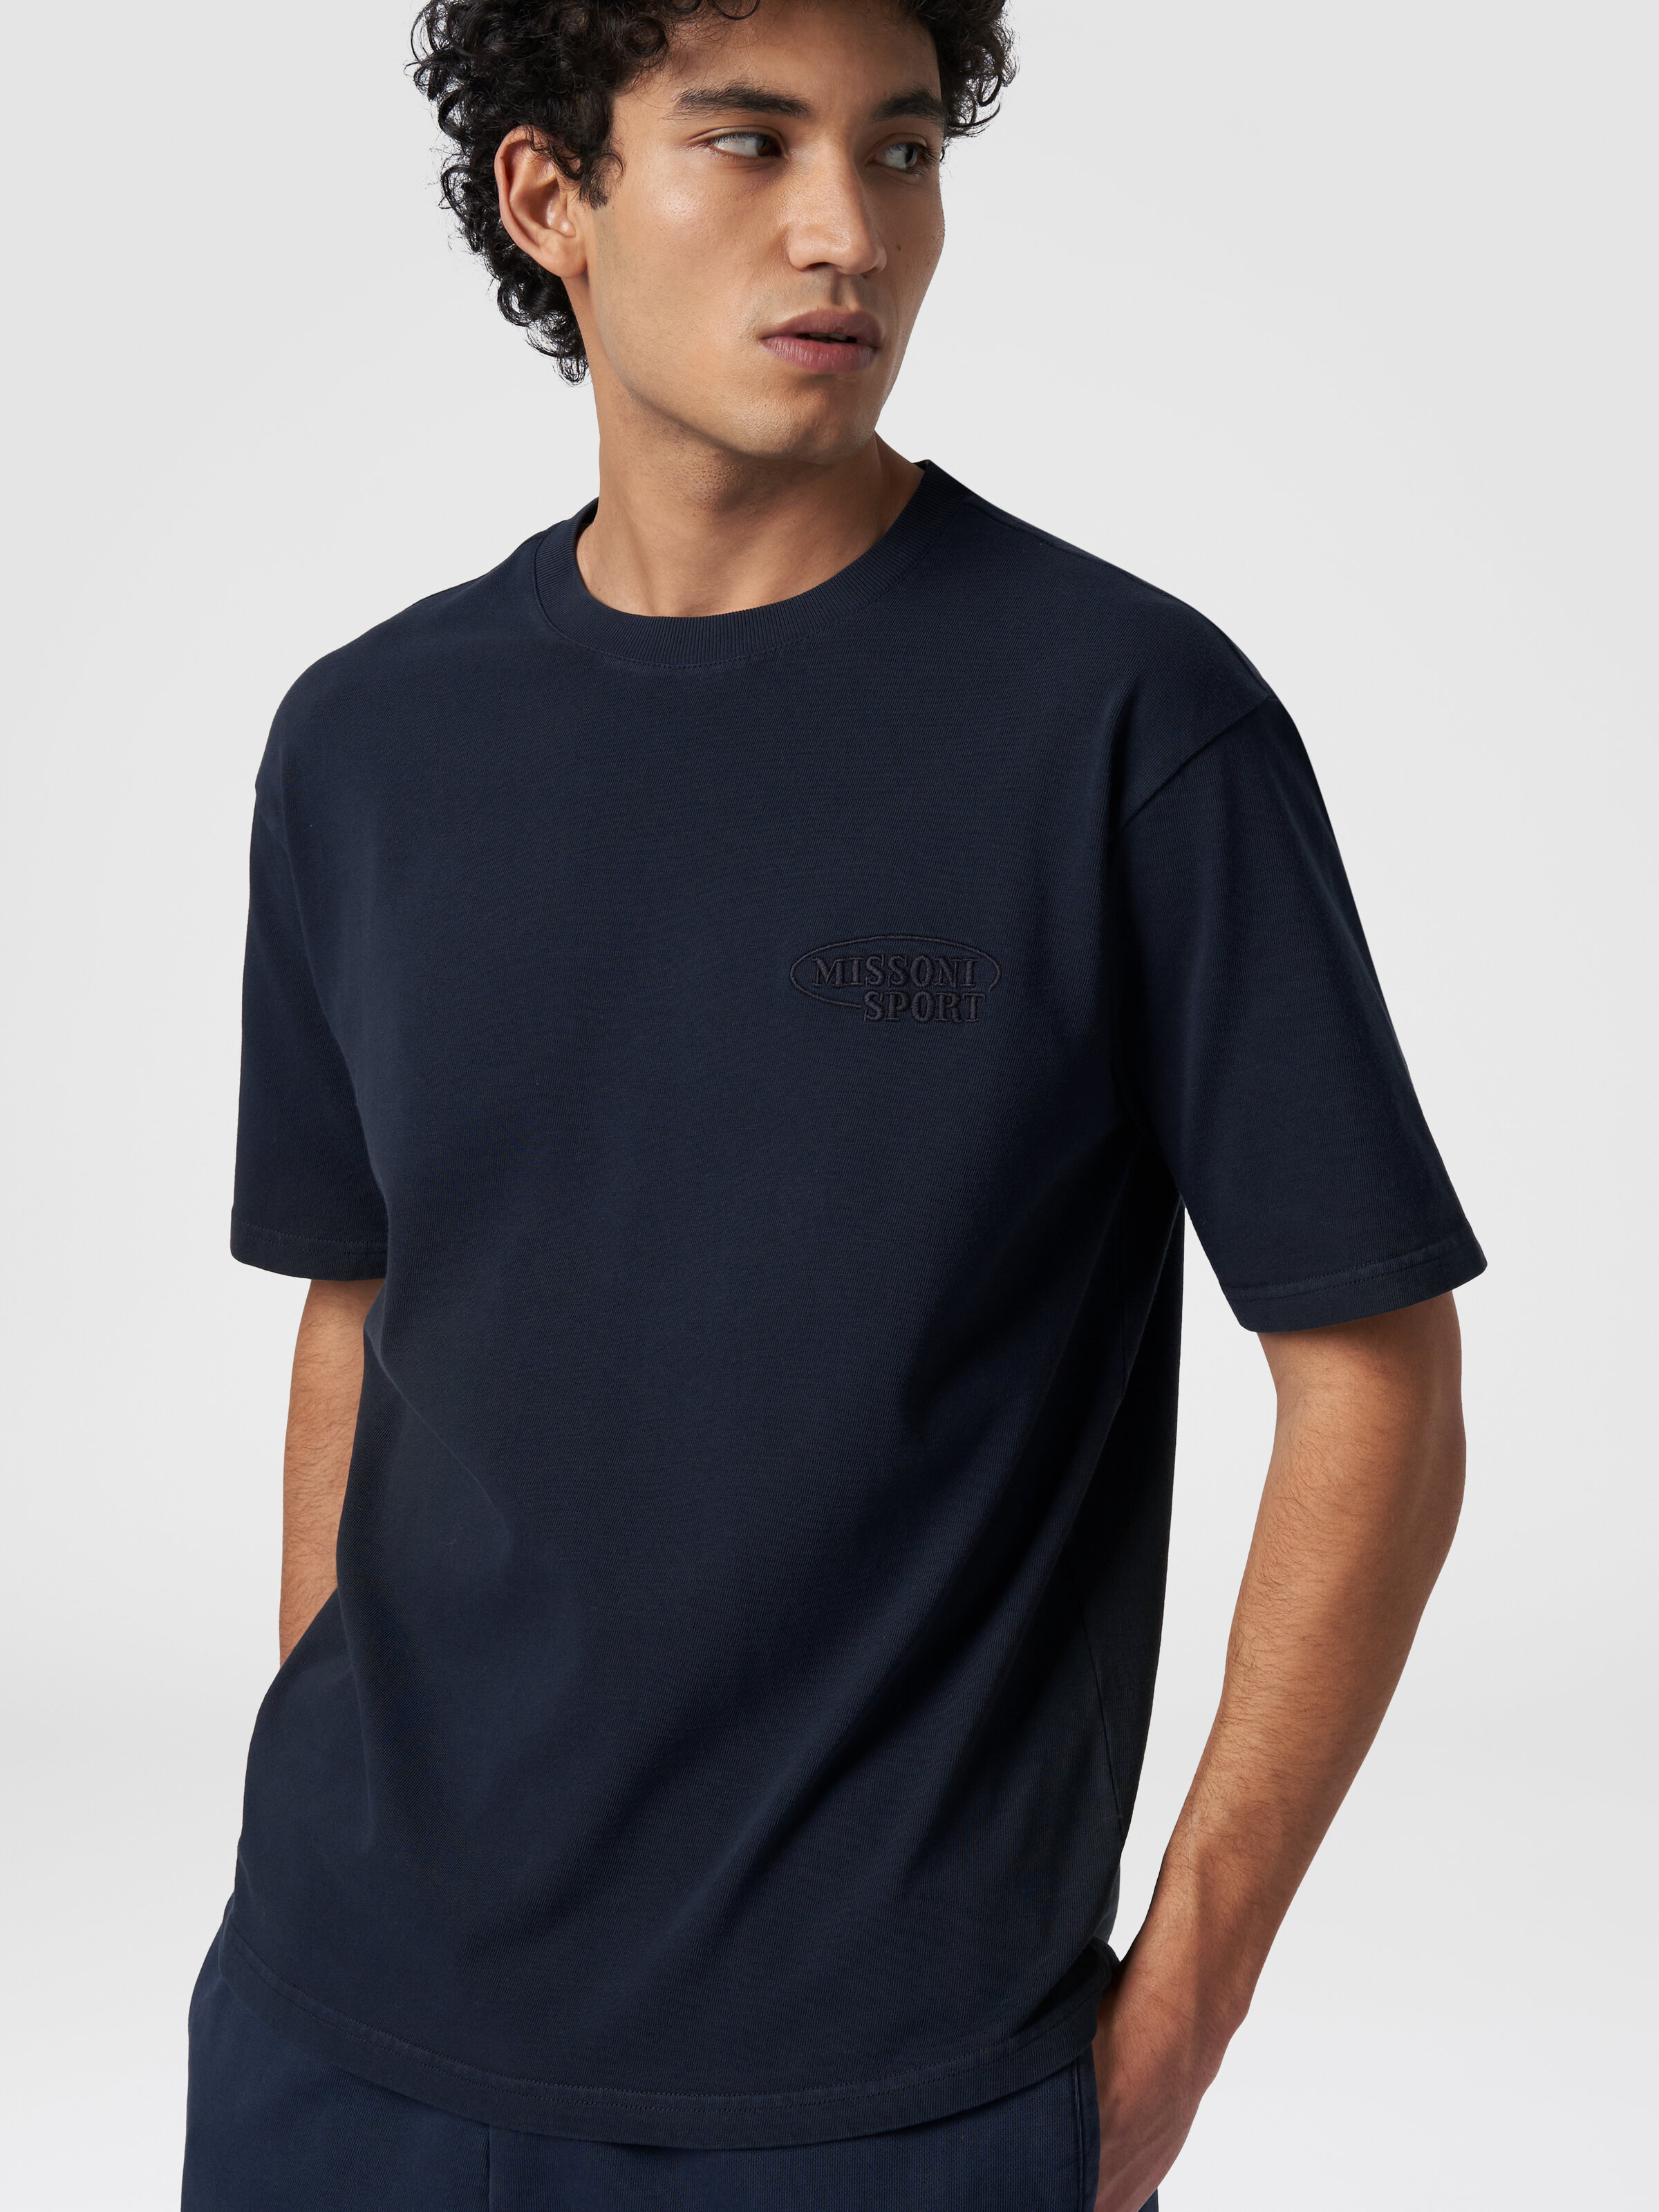 Crew-neck T-shirt in cotton with logo, Navy Blue  - 3